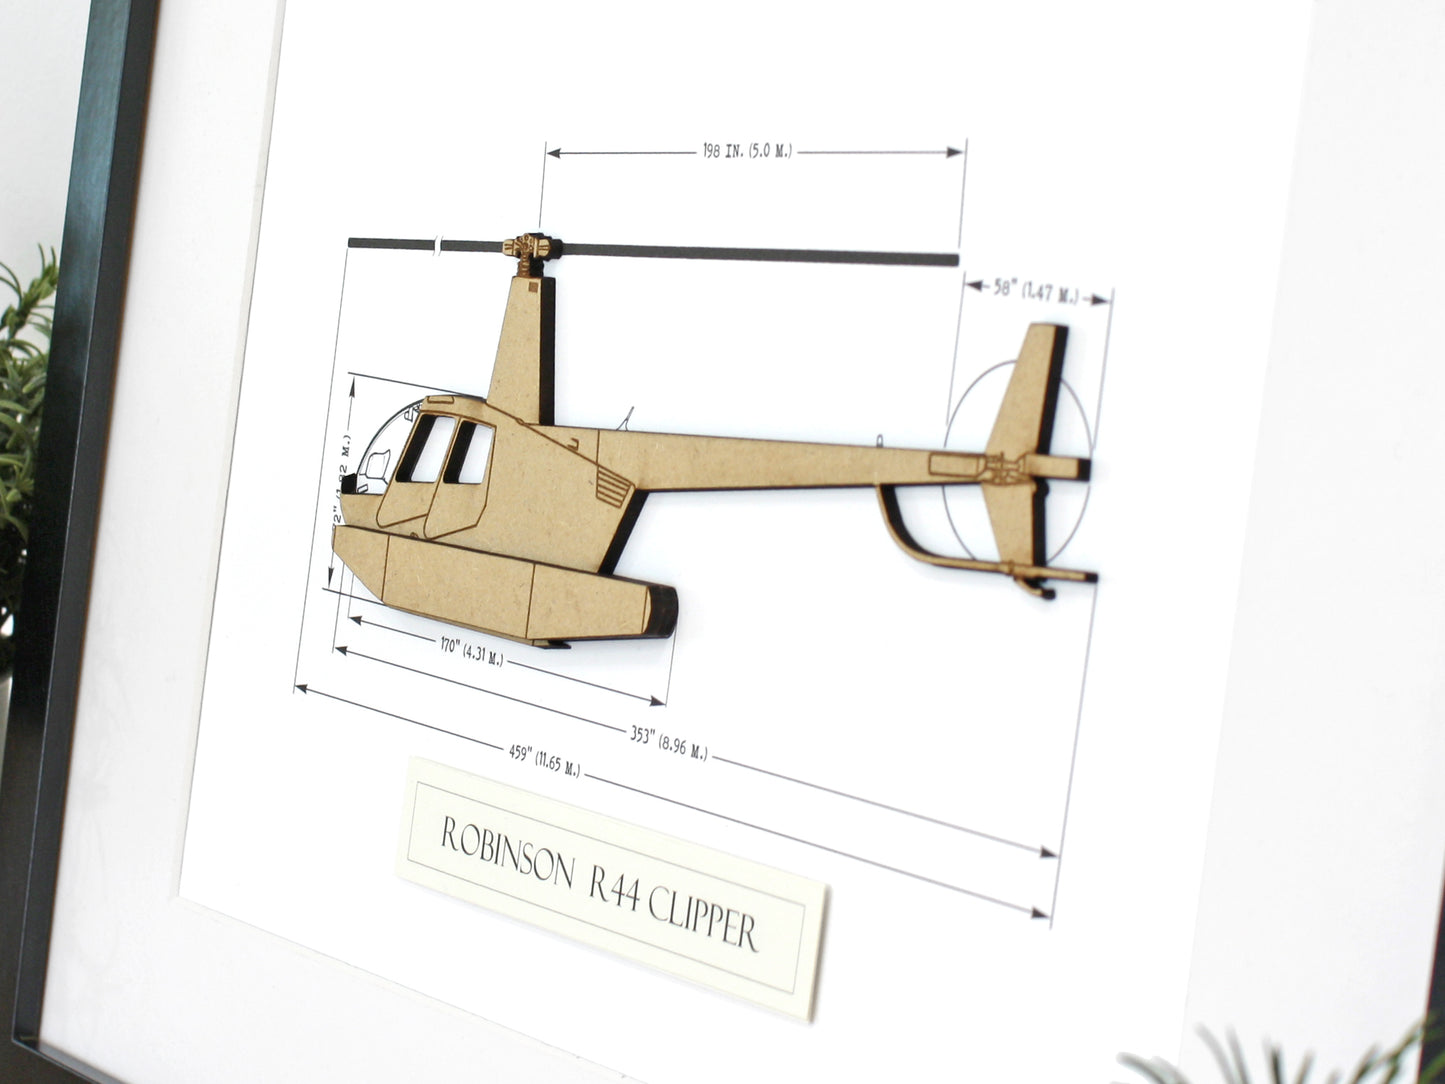 Robinson R44 Clipper helicopter gifts